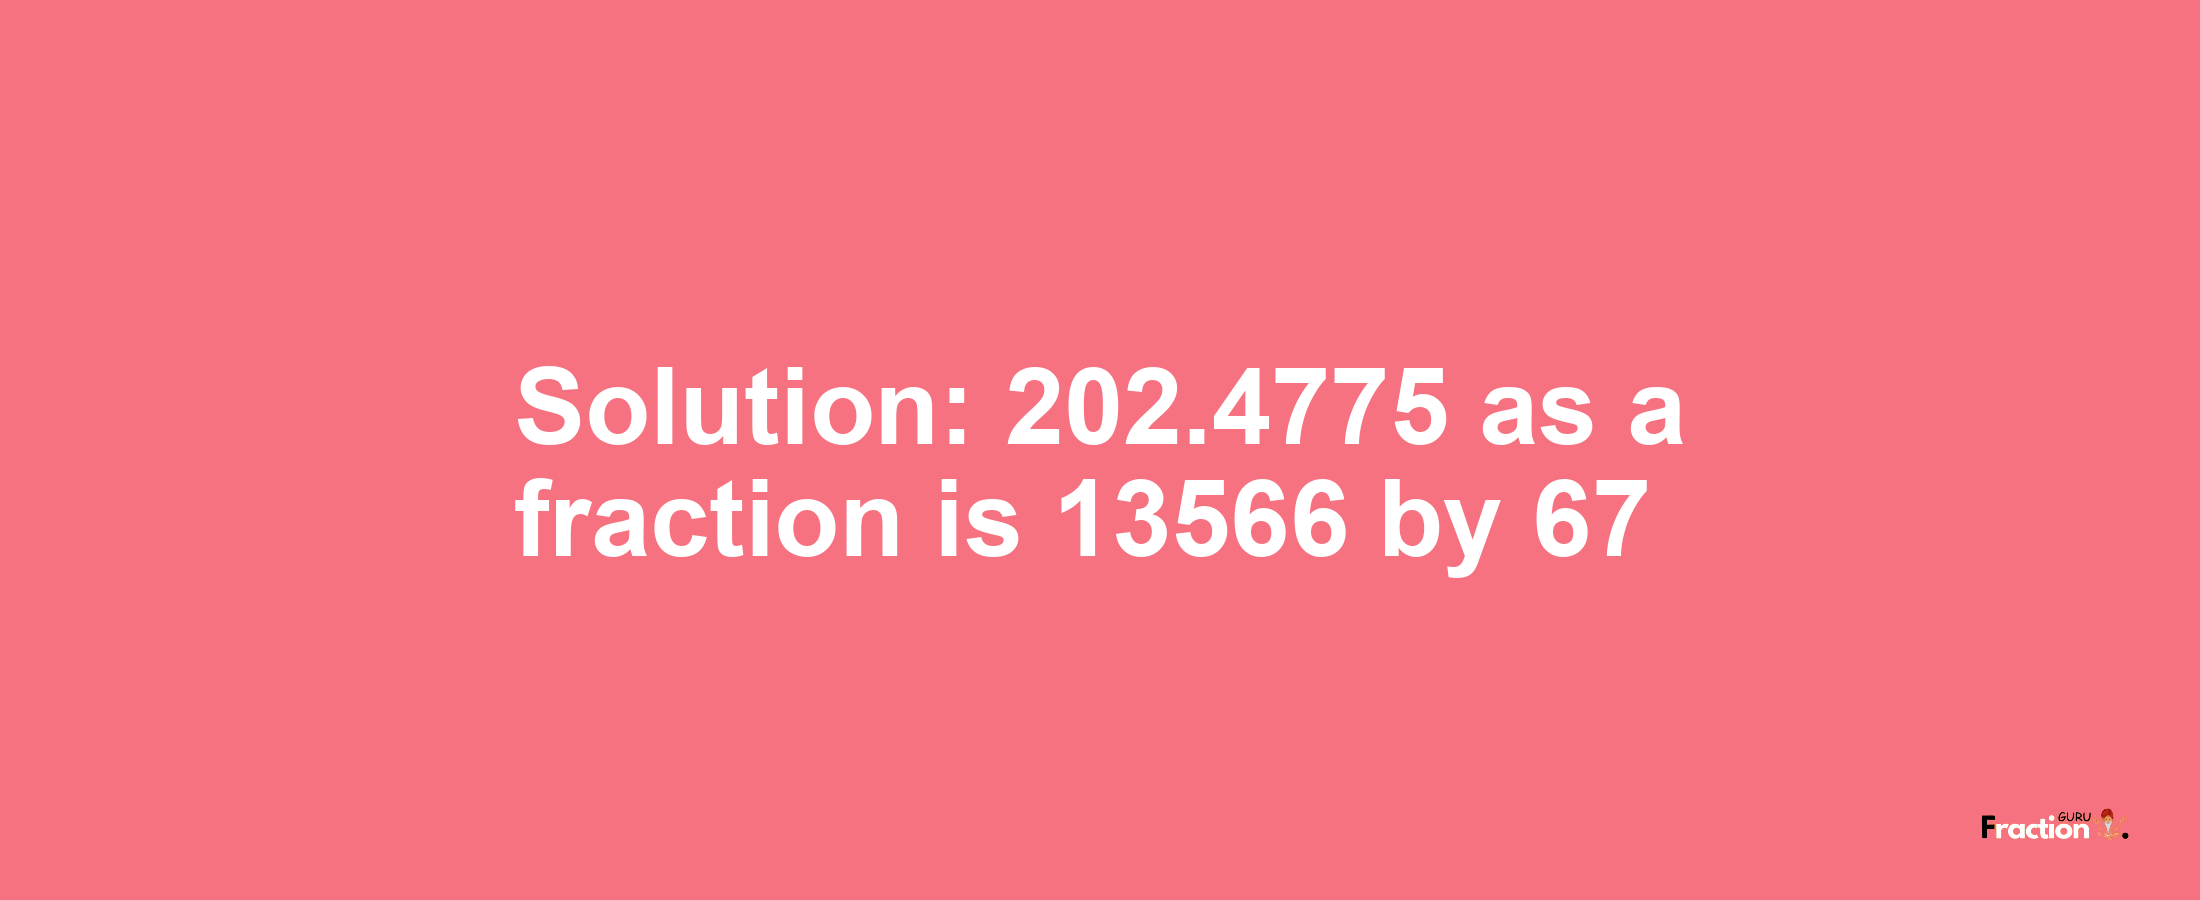 Solution:202.4775 as a fraction is 13566/67